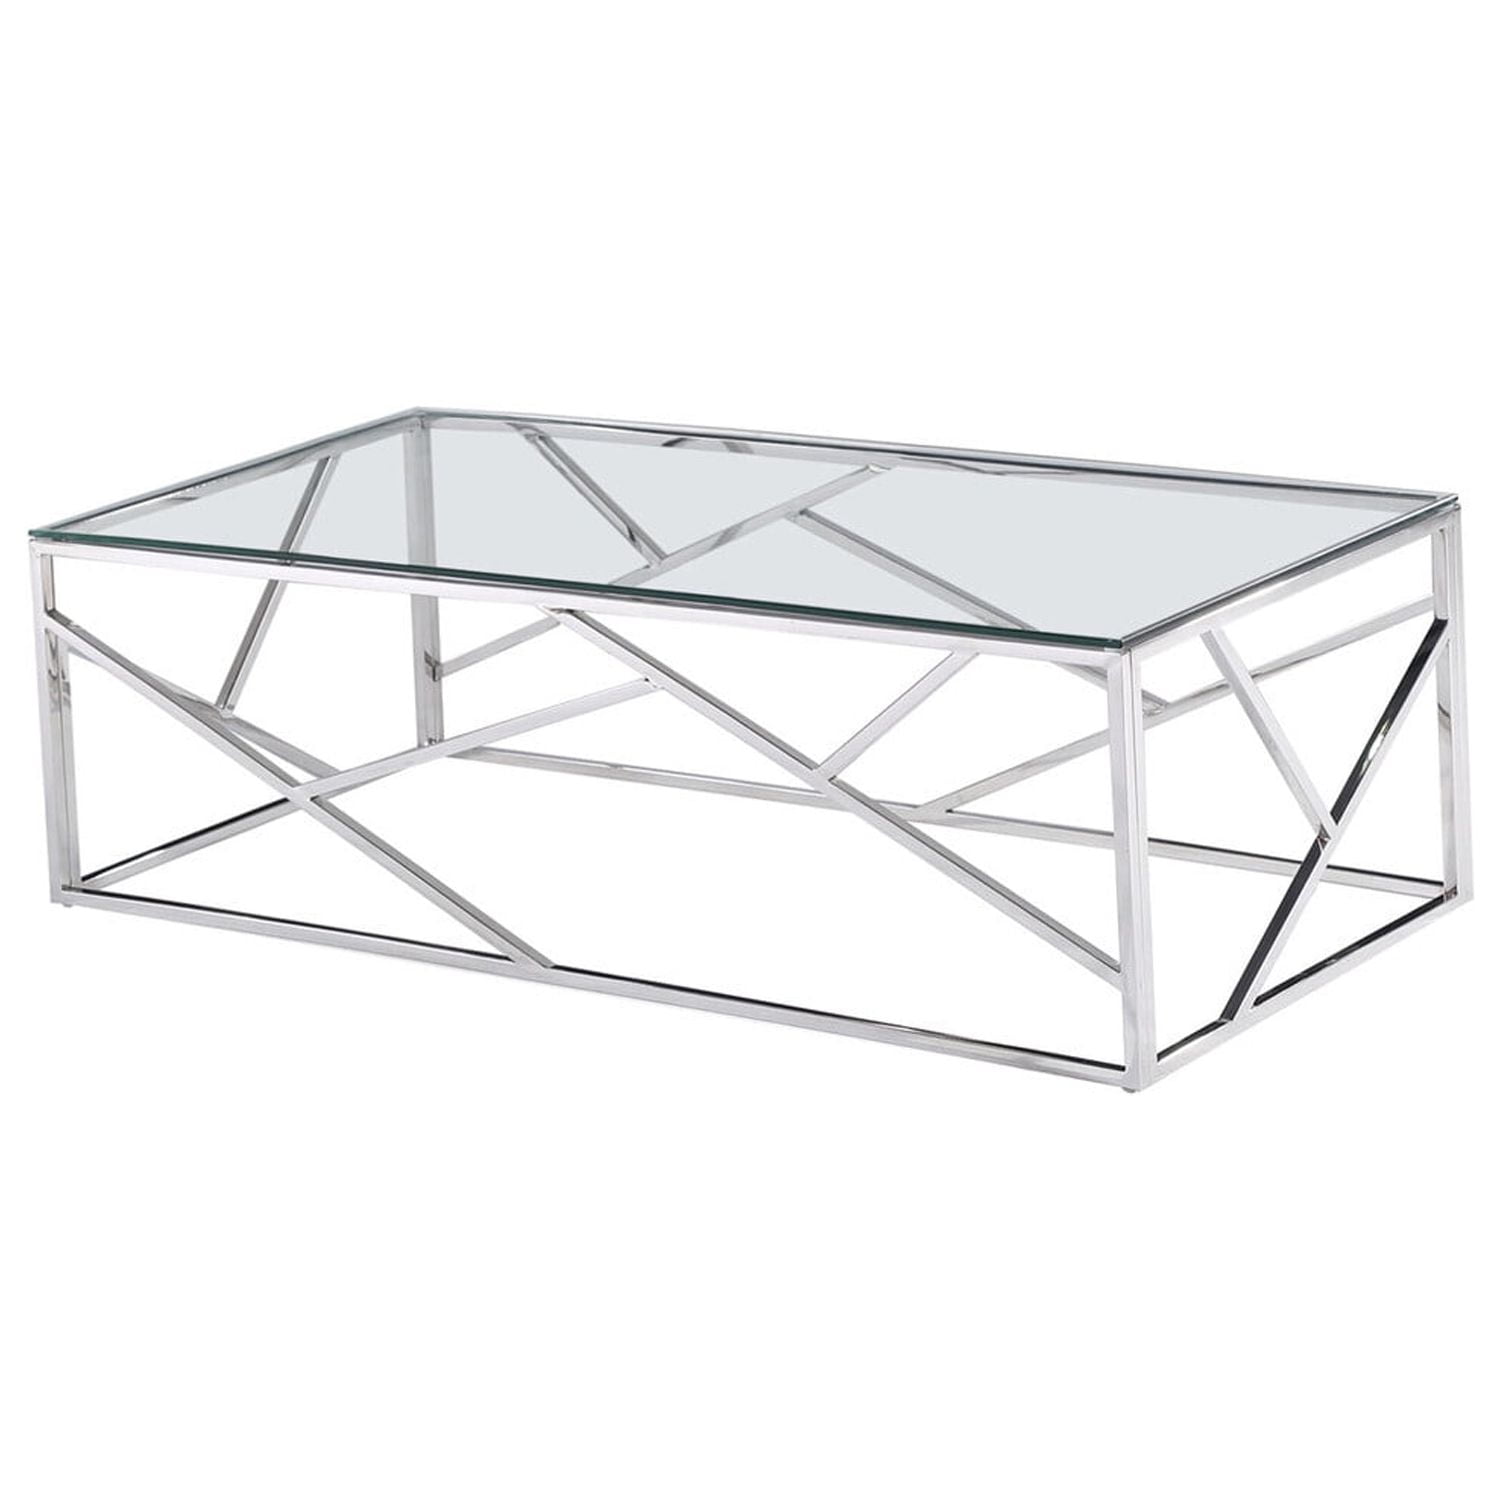 E26 Silver Coffee Table Stainless Steel Living Room Silver Coffee Table